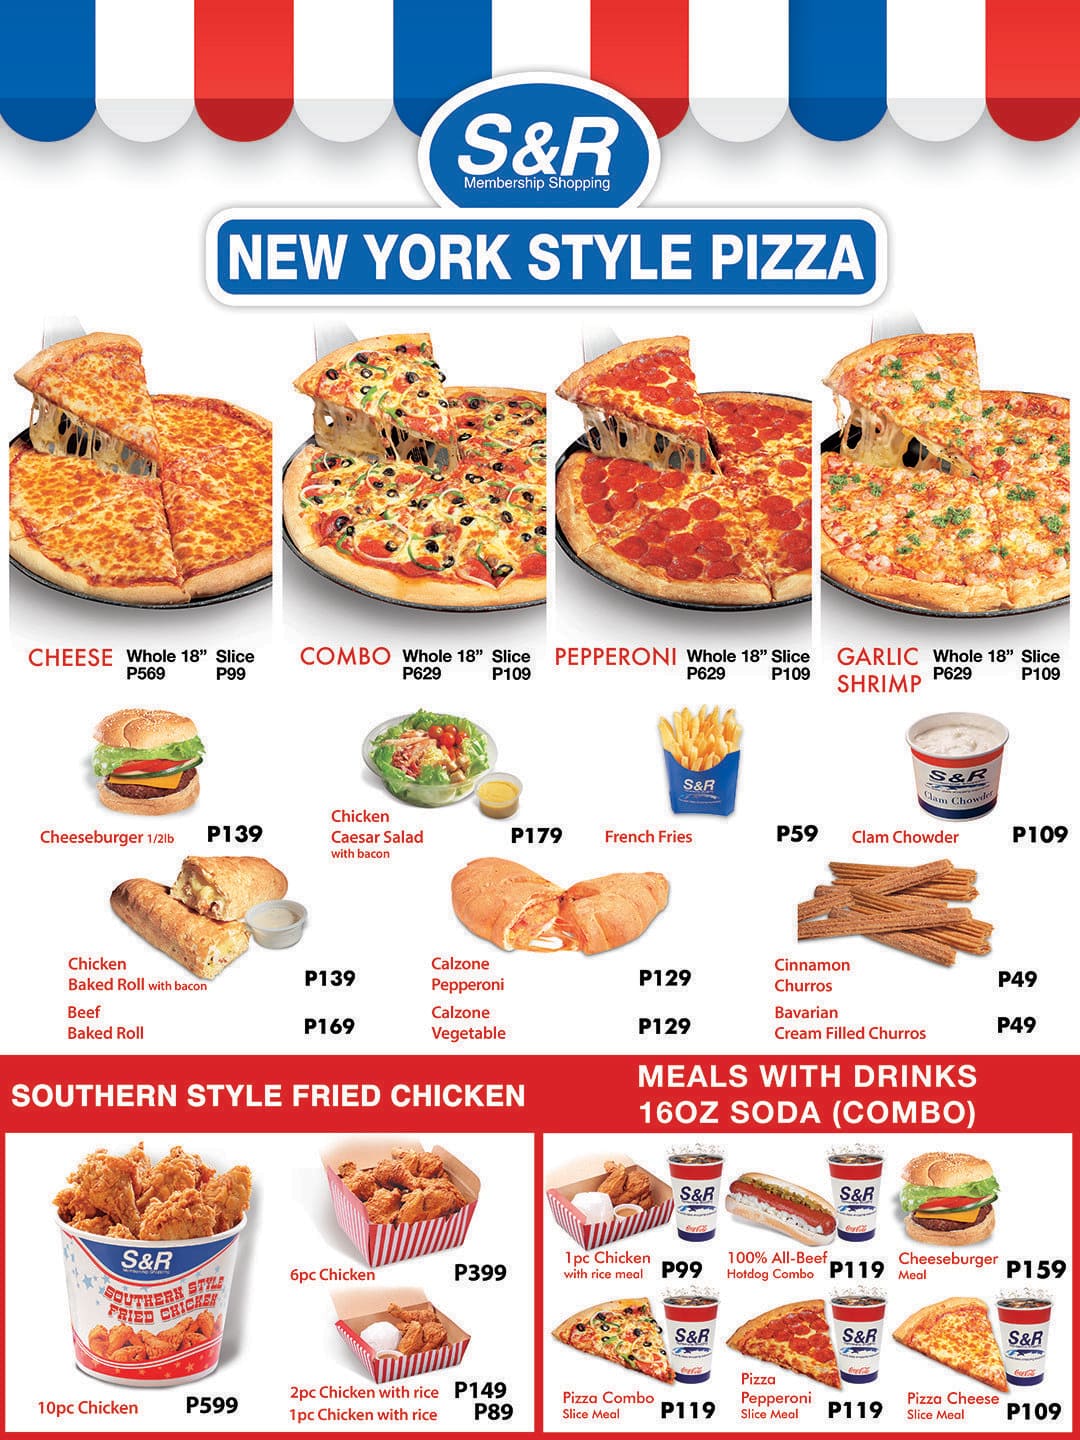 S&amp;R New York Style Pizza Menu, Menu for S&amp;R New York Style Pizza, Libis